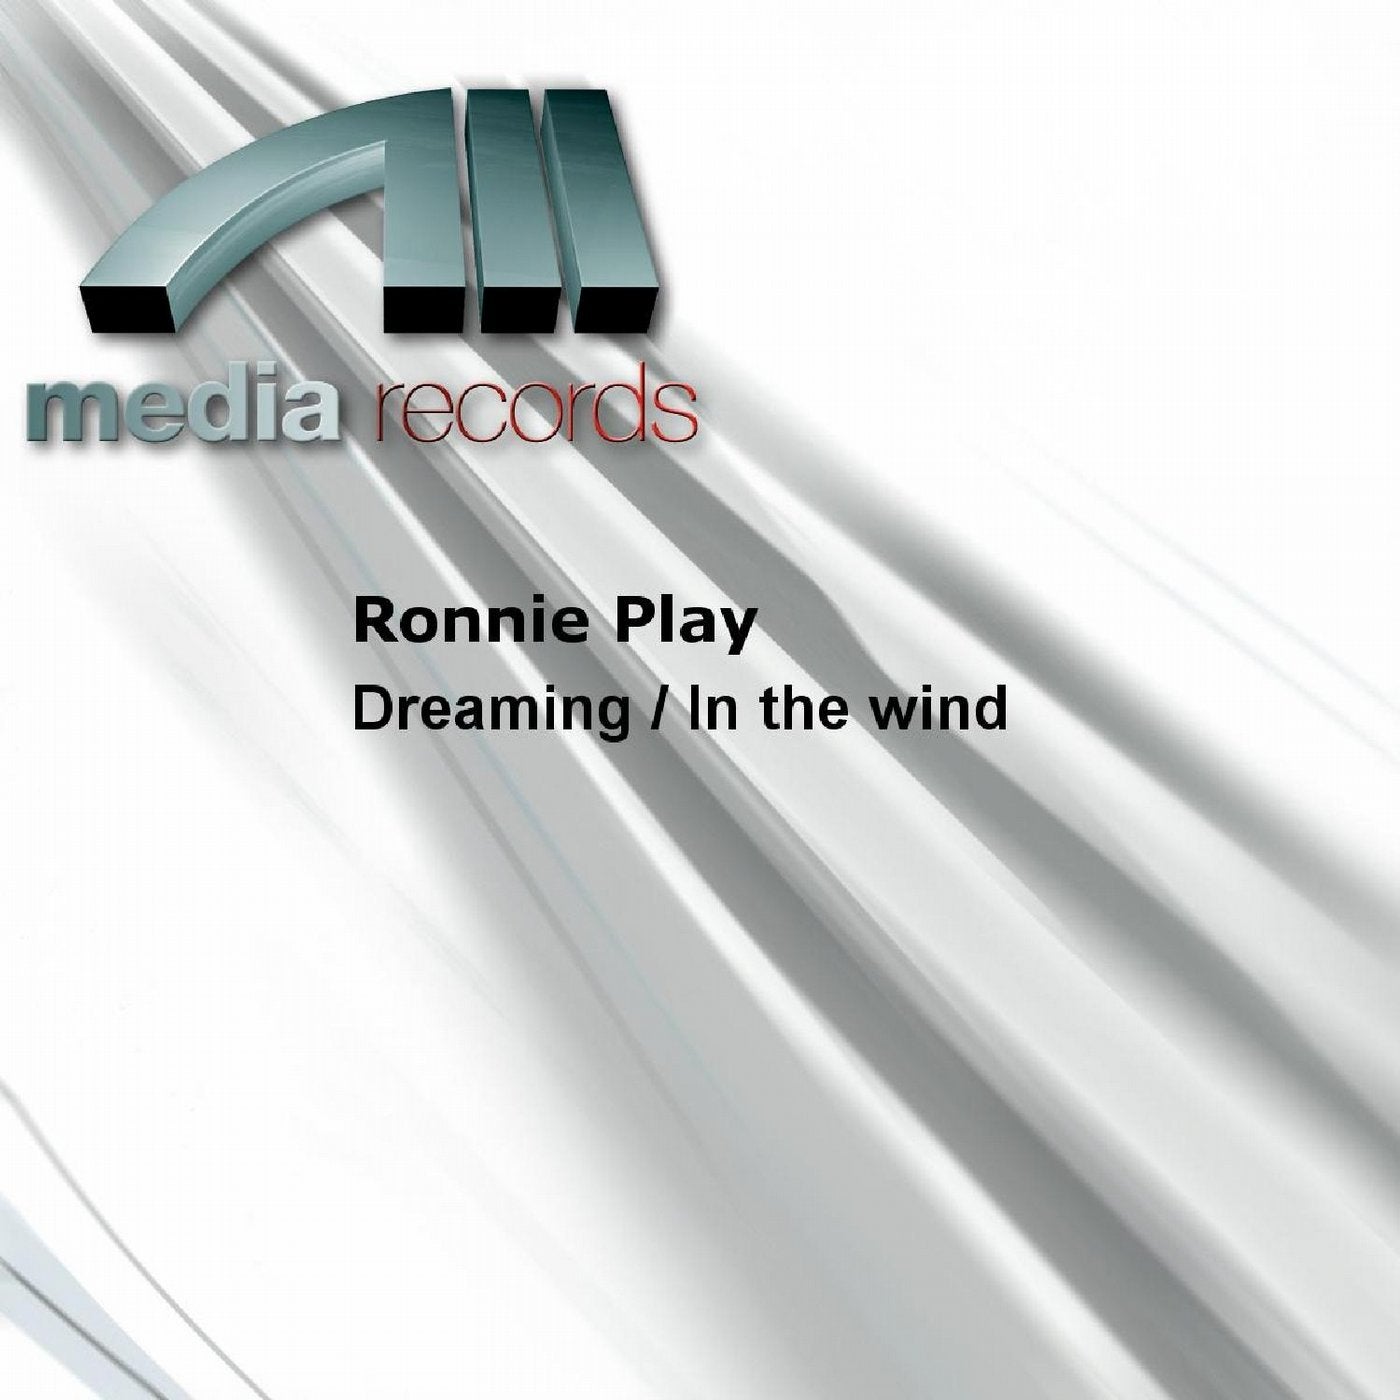 Dreaming / In the wind